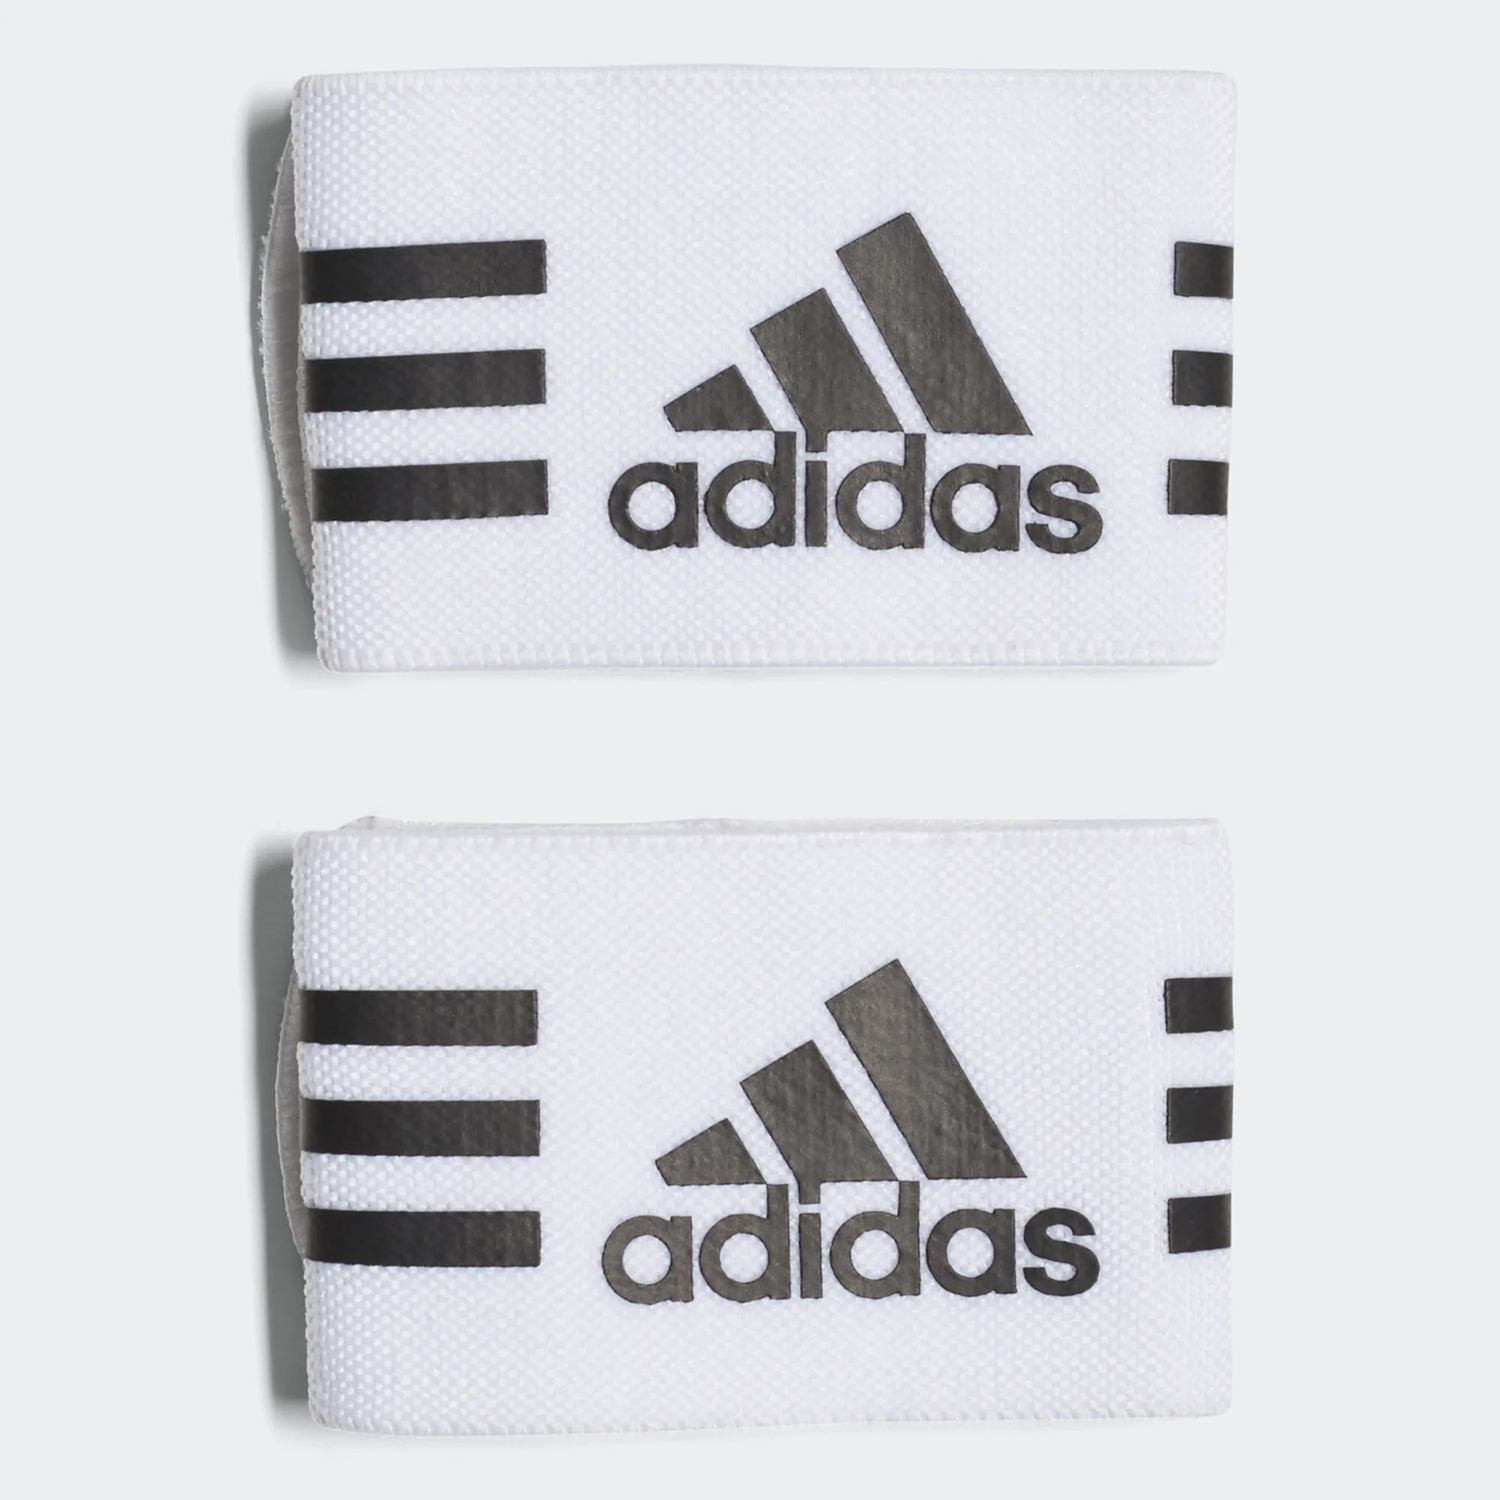 Adidas Ankle Strap 500 (9000033134_3416)